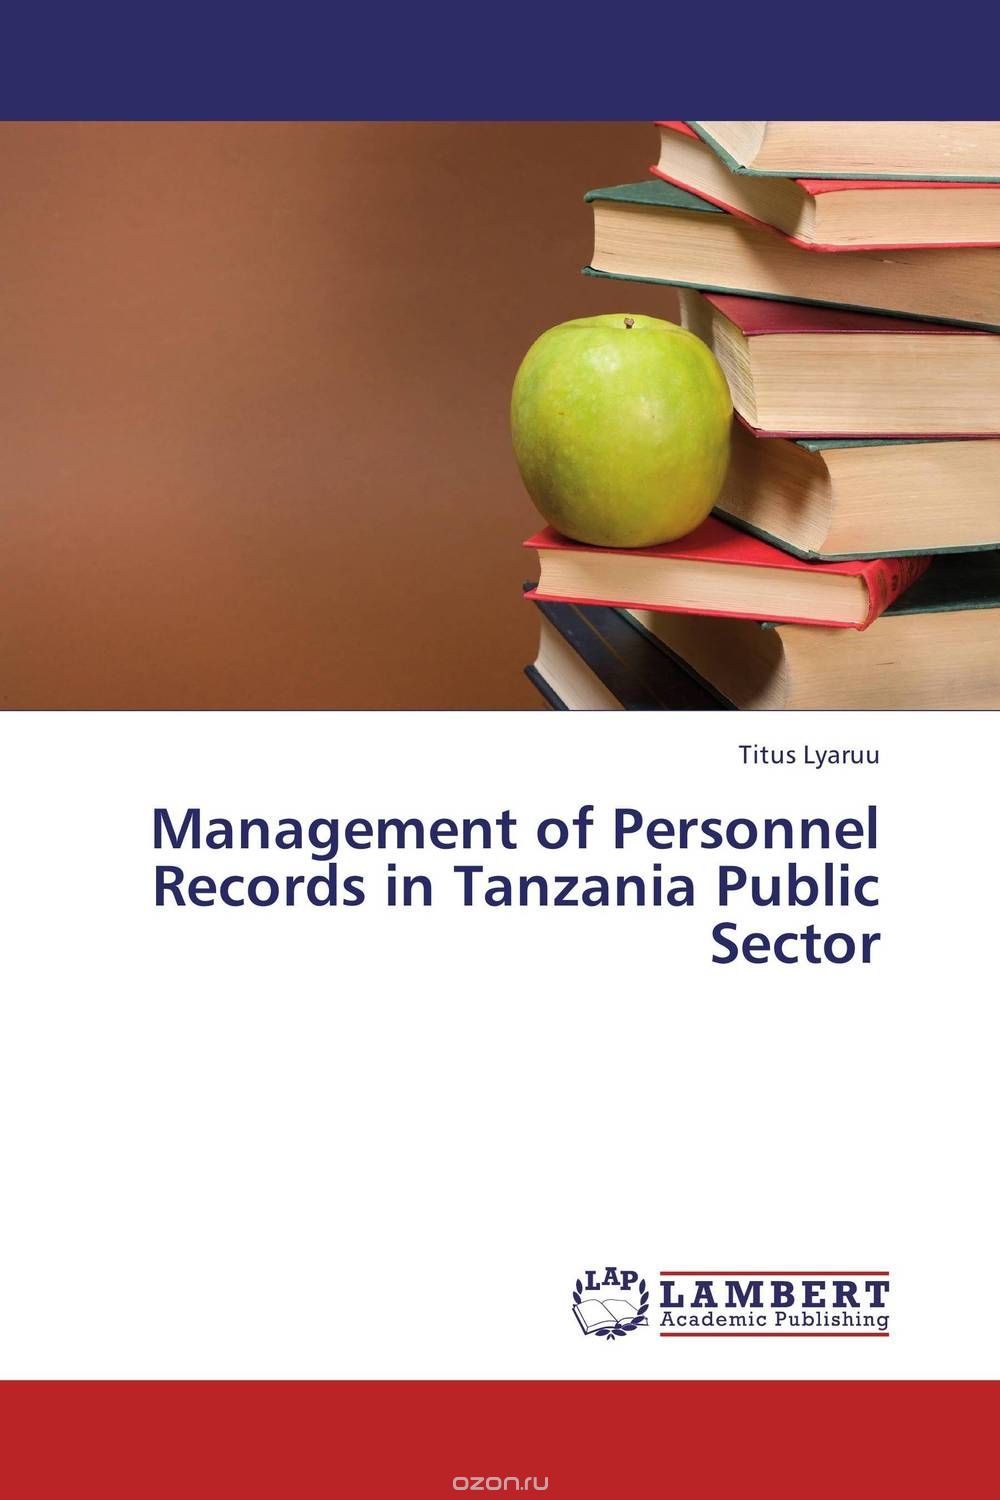 Скачать книгу "Management of Personnel Records in Tanzania Public Sector"